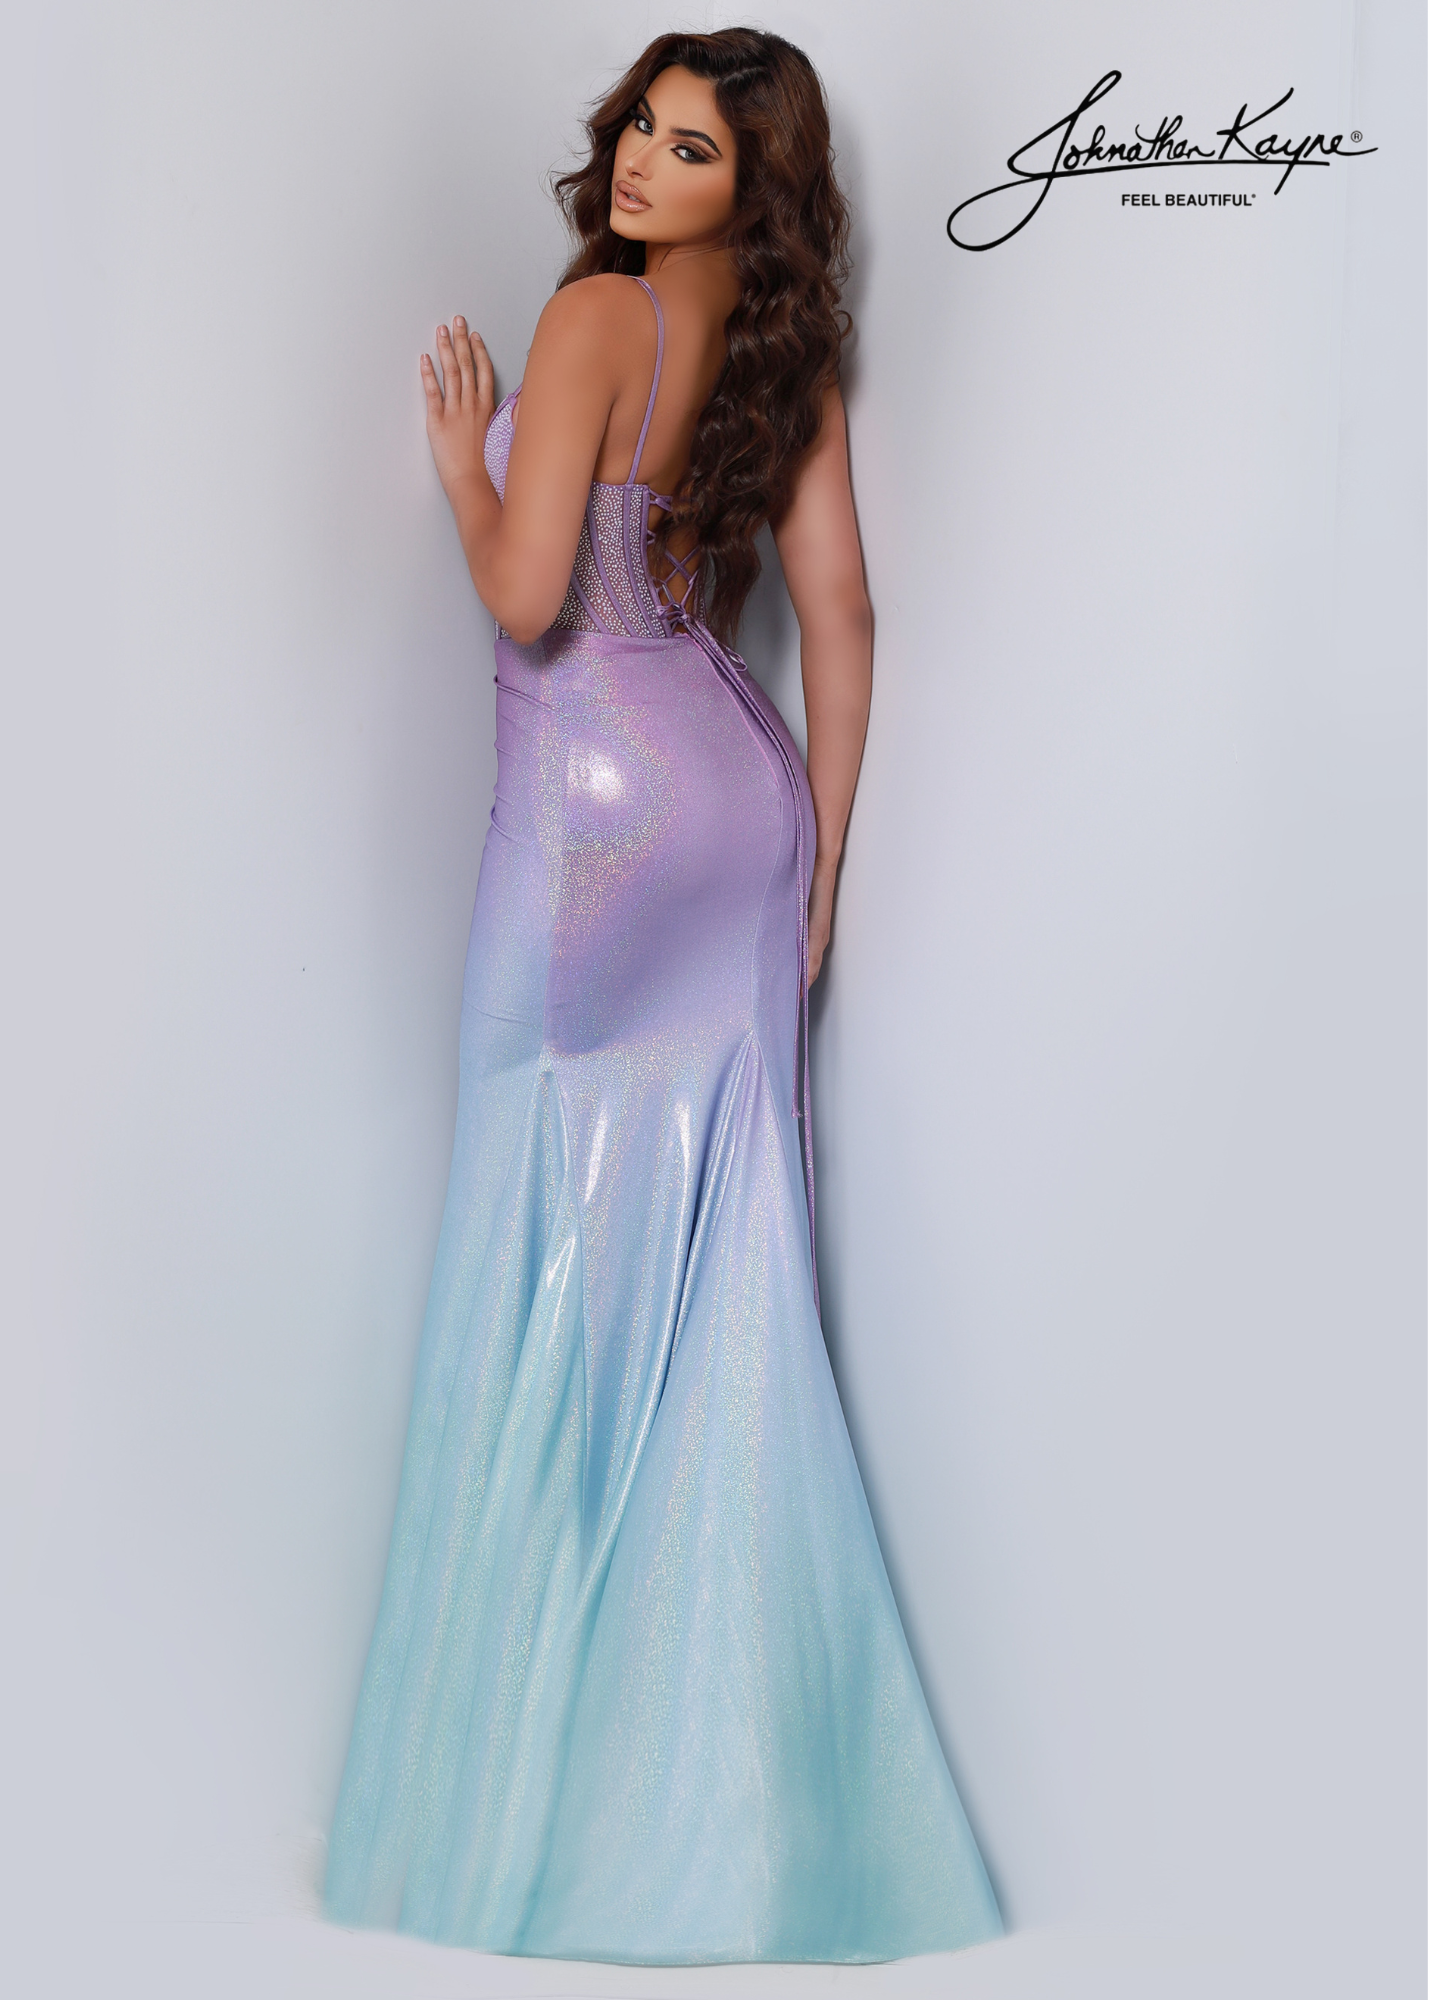 Johnathan Kayne 2648 is an elegant formal dress, featuring a strapless bodice, corset-style back, and a beautiful ombre hue. Its dramatic high slit and soft flowing skirt make it the perfect choice for any pageant or special occasion. Be a mermaid and make waves at your next special event with this ombre stretch jersey beauty! The semi-sheer bodice is finished with decorative boning and corset back to accentuate your waist.